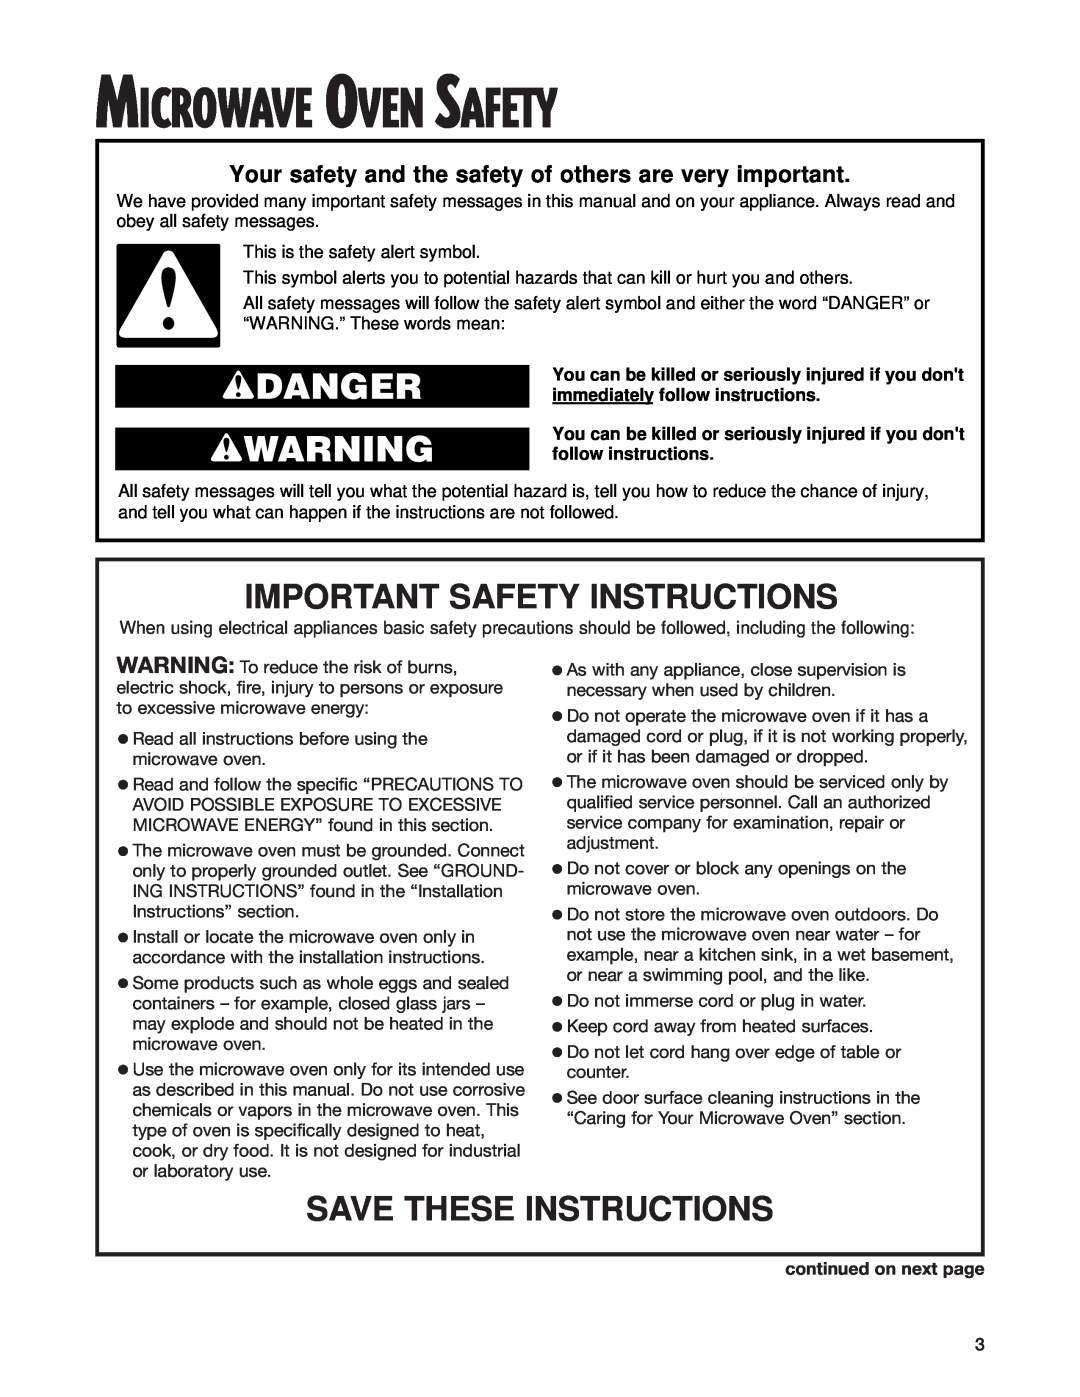 Whirlpool MT4210SK Microwave Oven Safety, wDANGER wWARNING, Important Safety Instructions, Save These Instructions 